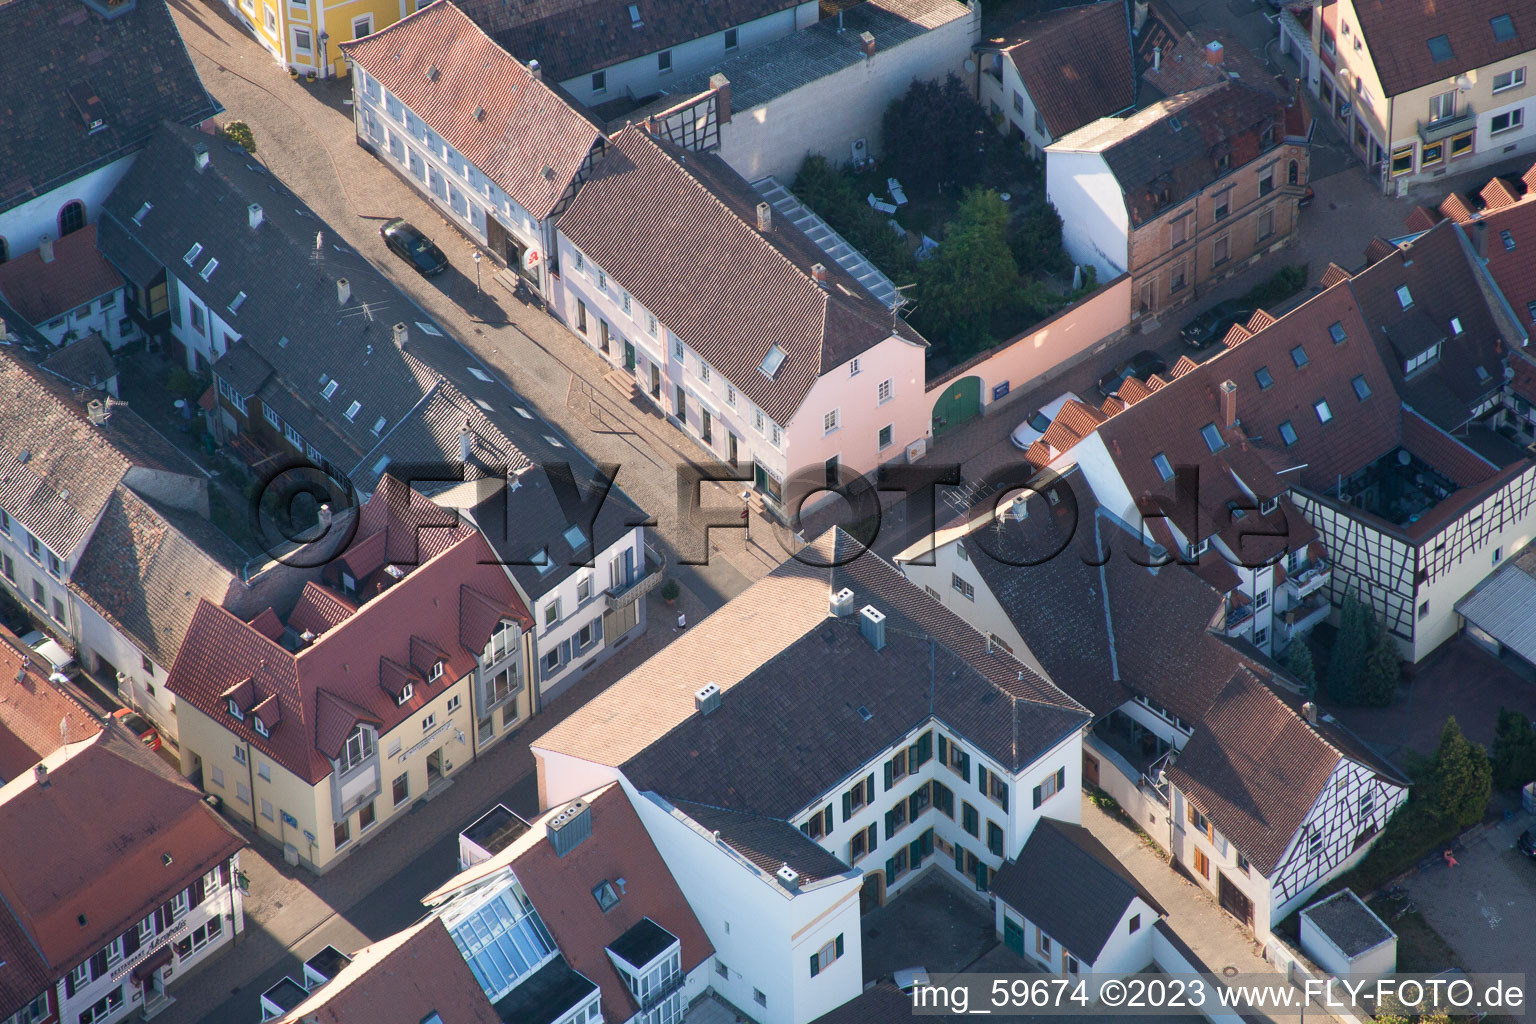 Germersheim in the state Rhineland-Palatinate, Germany from above